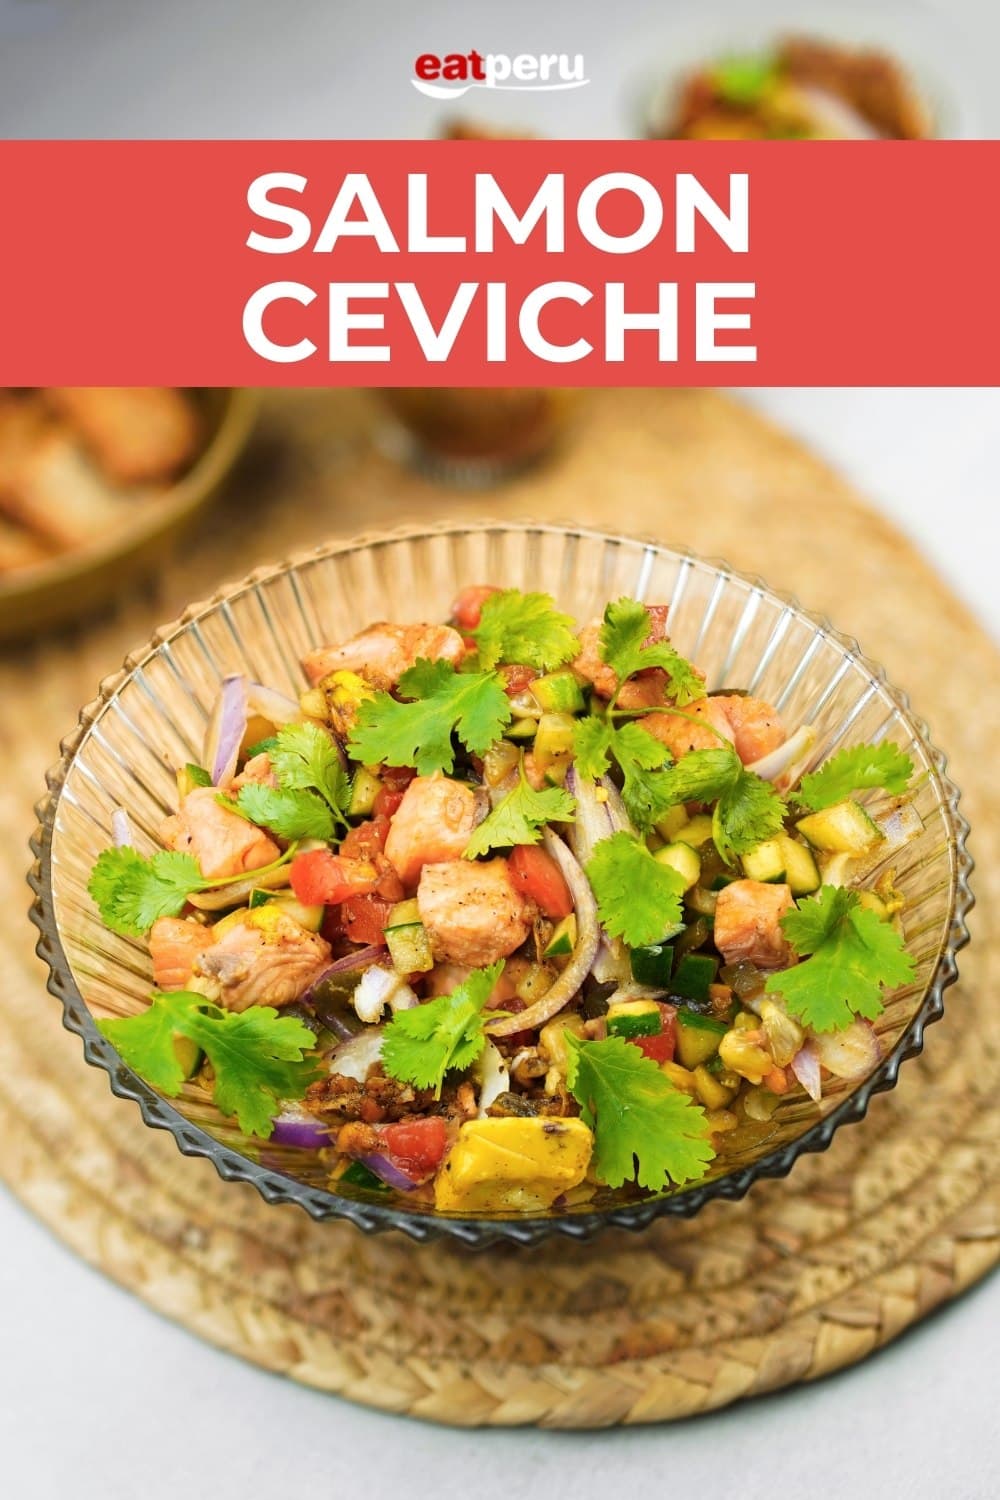 Bowl of ceviche made with salmon fish